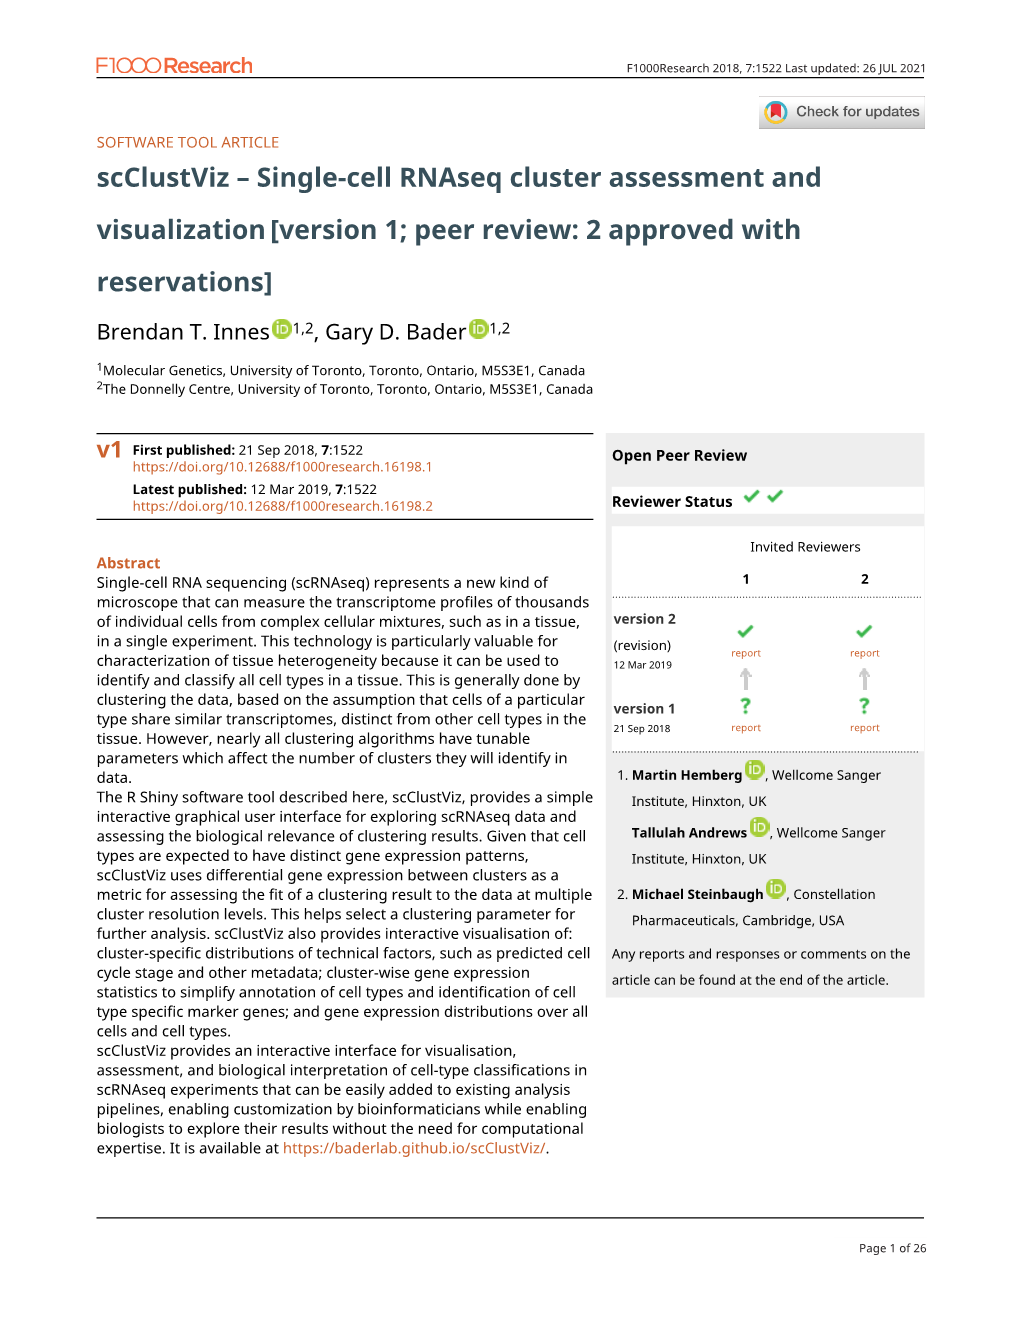 Scclustviz – Single-Cell Rnaseq Cluster Assessment and Visualization [Version 1; Peer Review: 2 Approved with Reservations]